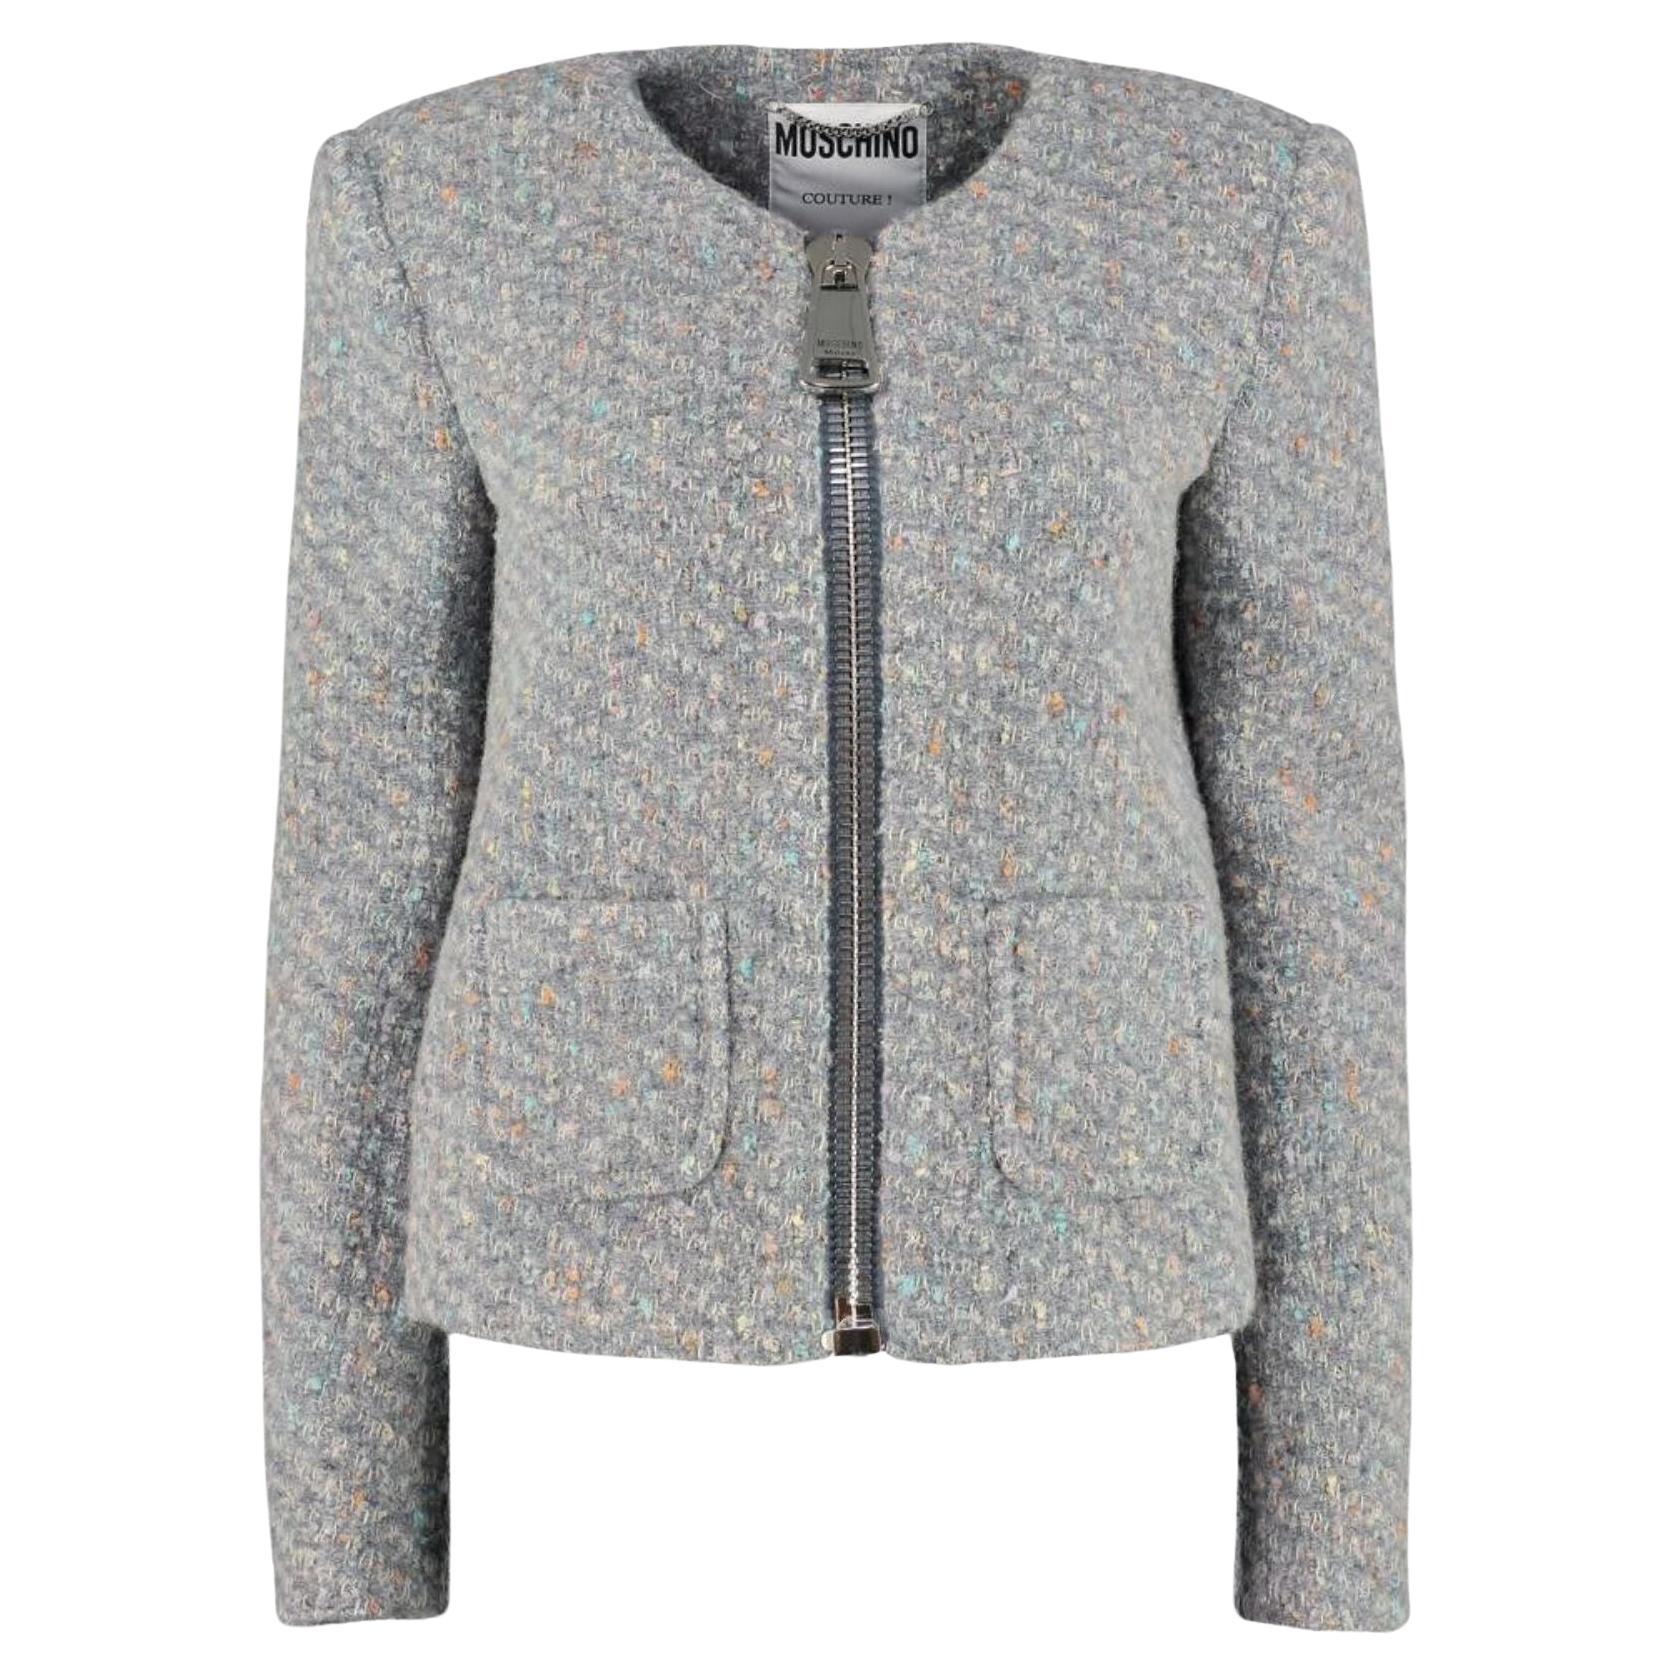 AW20 Moschino Couture Boucle Wool Jacket by Jeremy Scott, Size US 10 For Sale